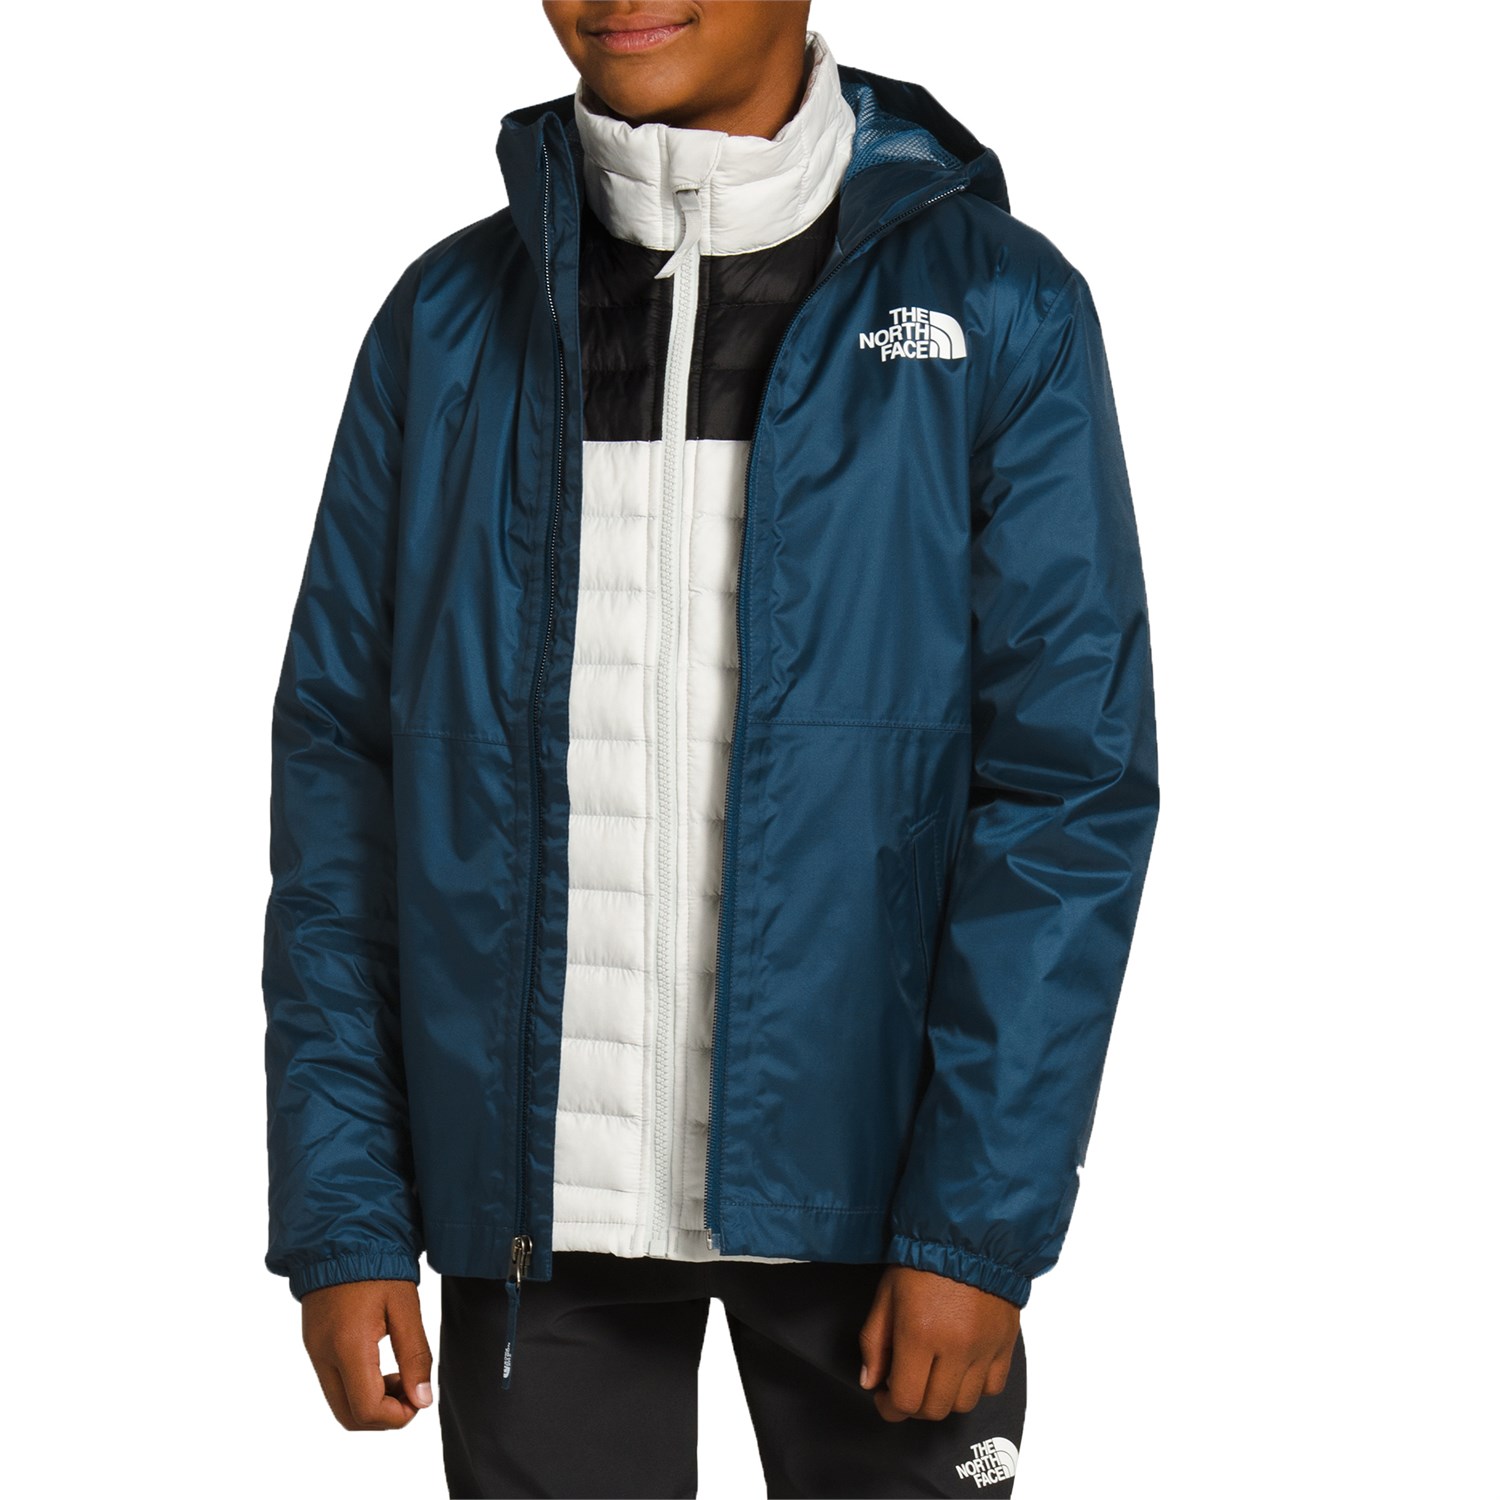 north face youth jacket